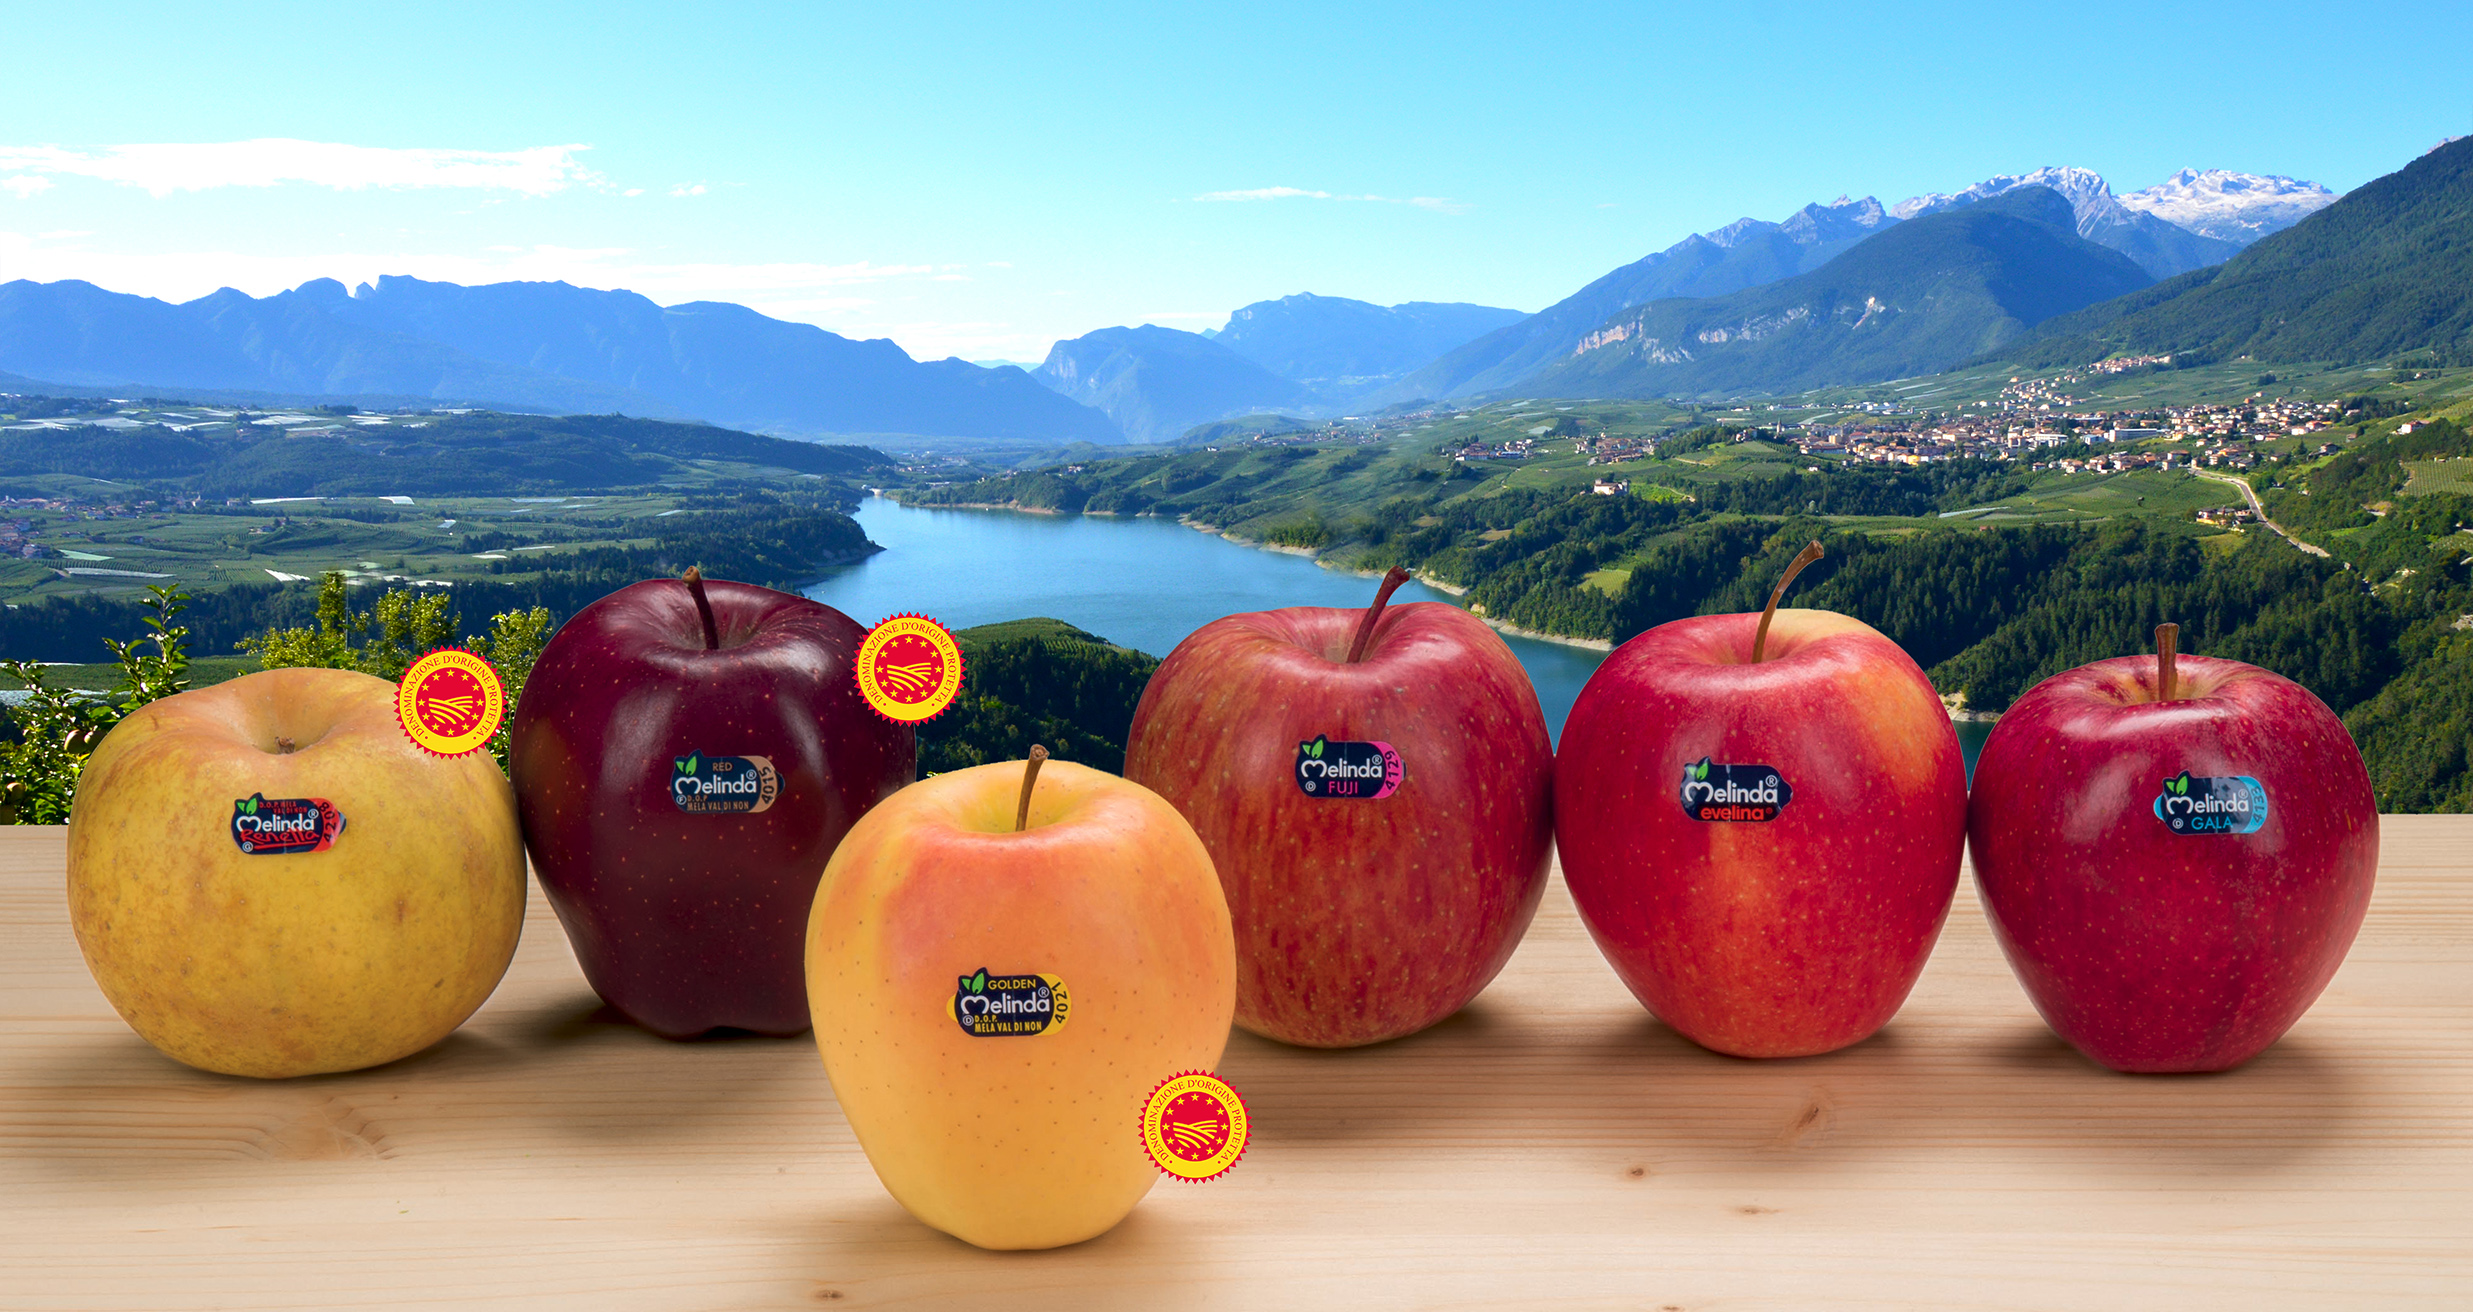 Apples matured in natural caves: this is the innovation Melinda presented at Fruit Logistica 2016 in Berlin, an innovation with a traditional touch that puts the Trento-based brand in a globally unique position.